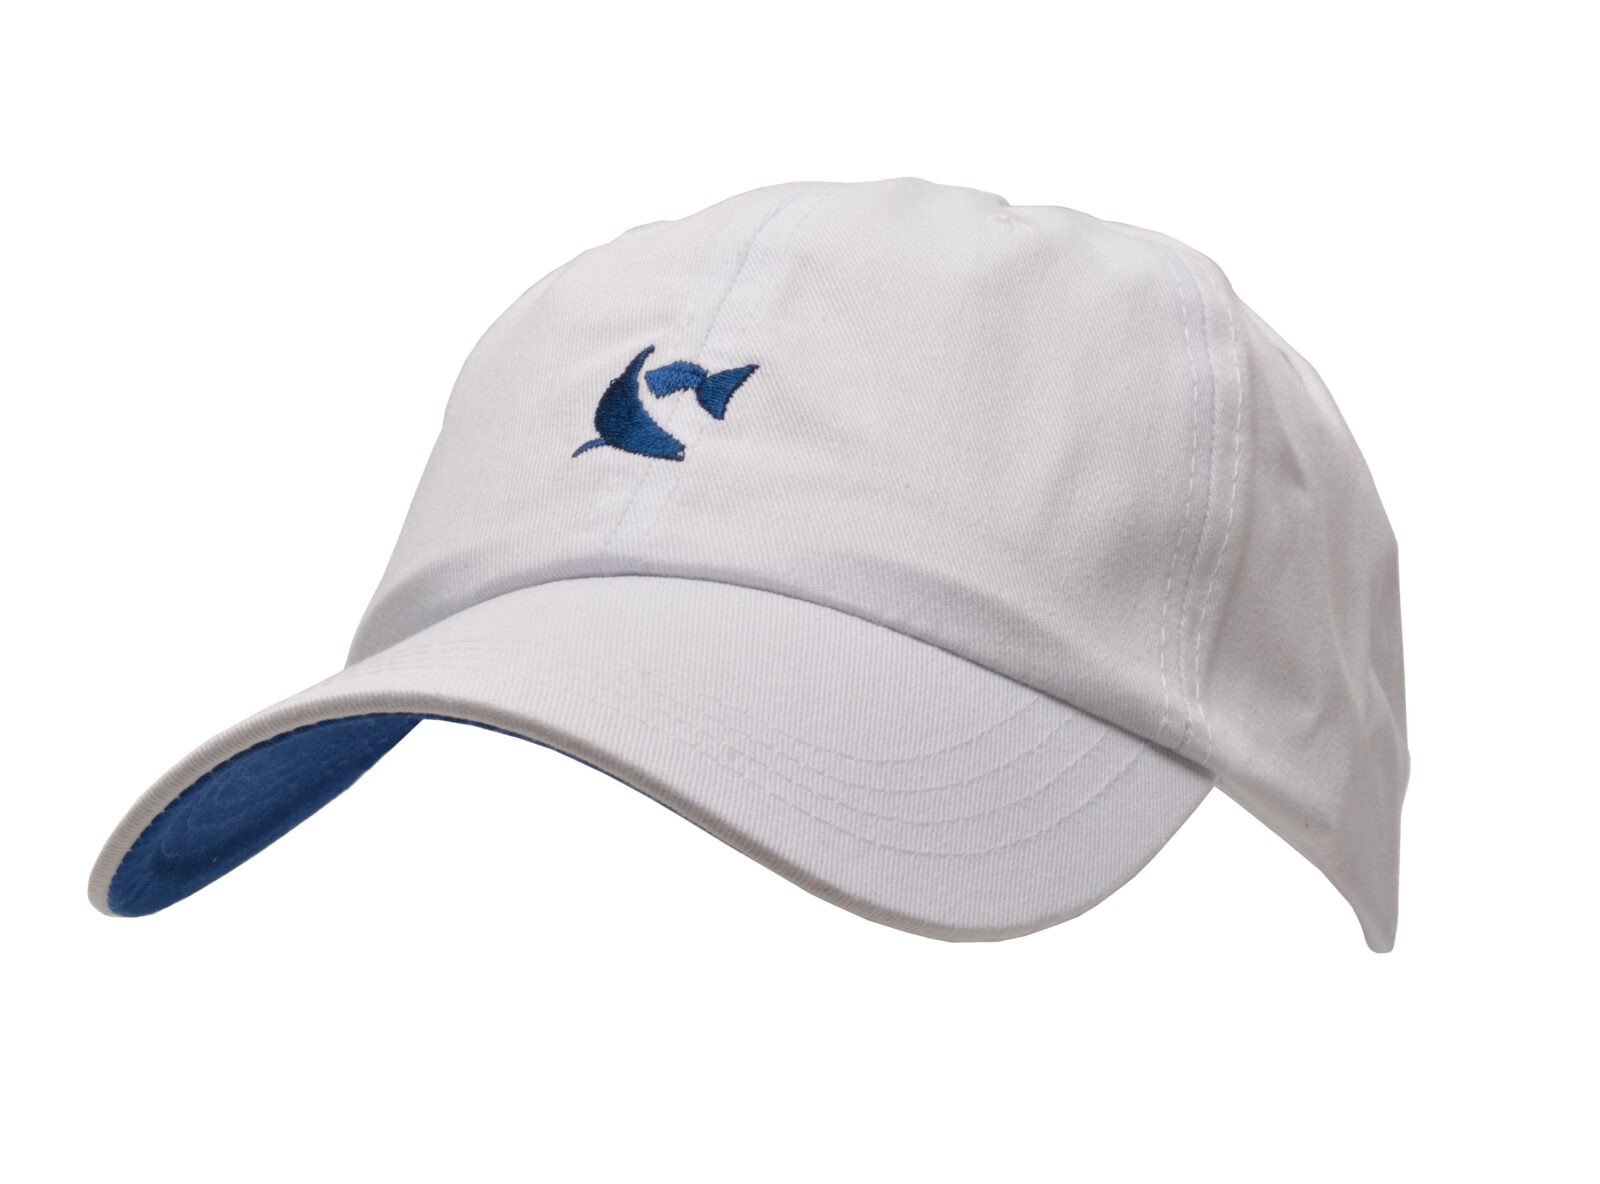 white and blue polo hat